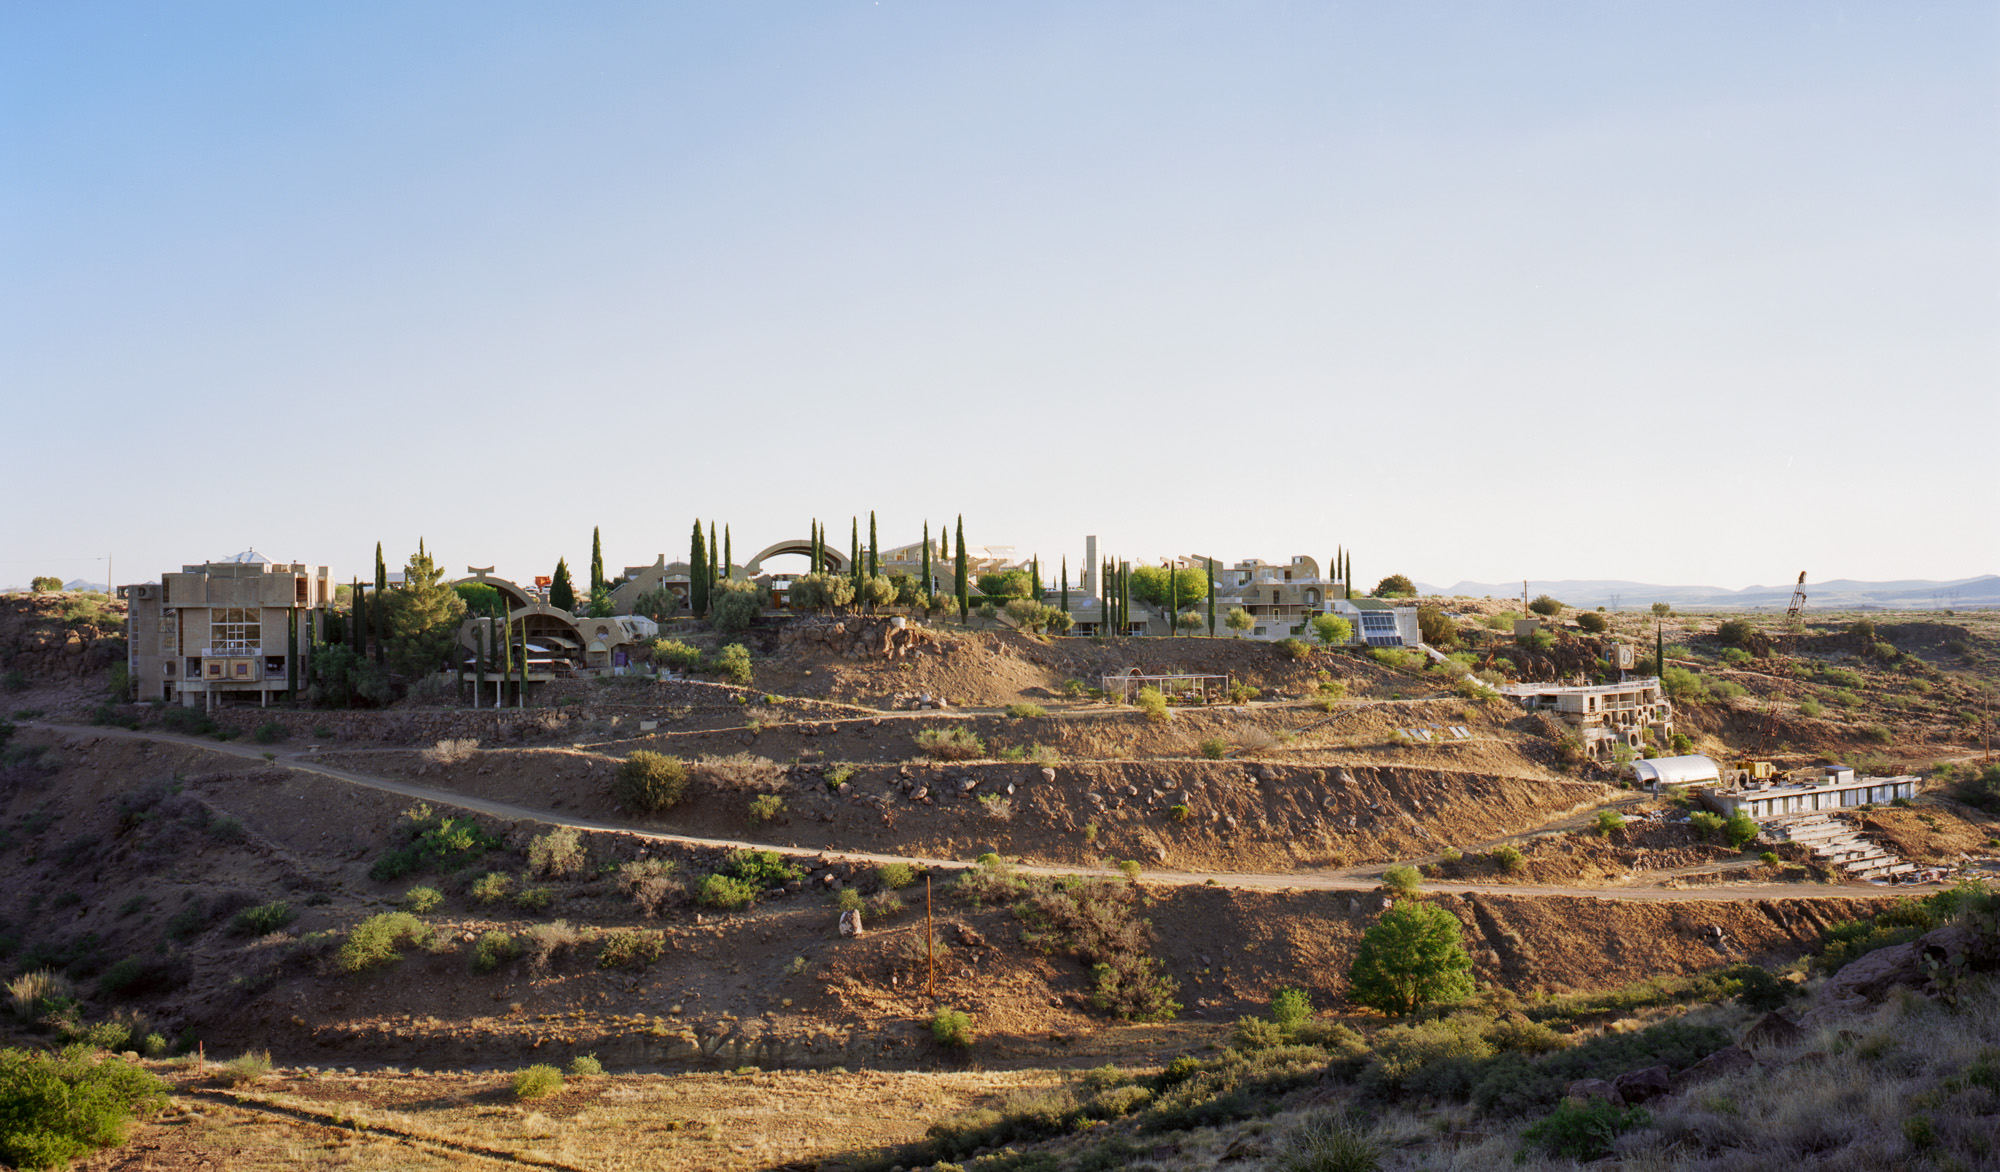  Arcosanti, photographed for Scottsdale Museum of Contemporary Art 